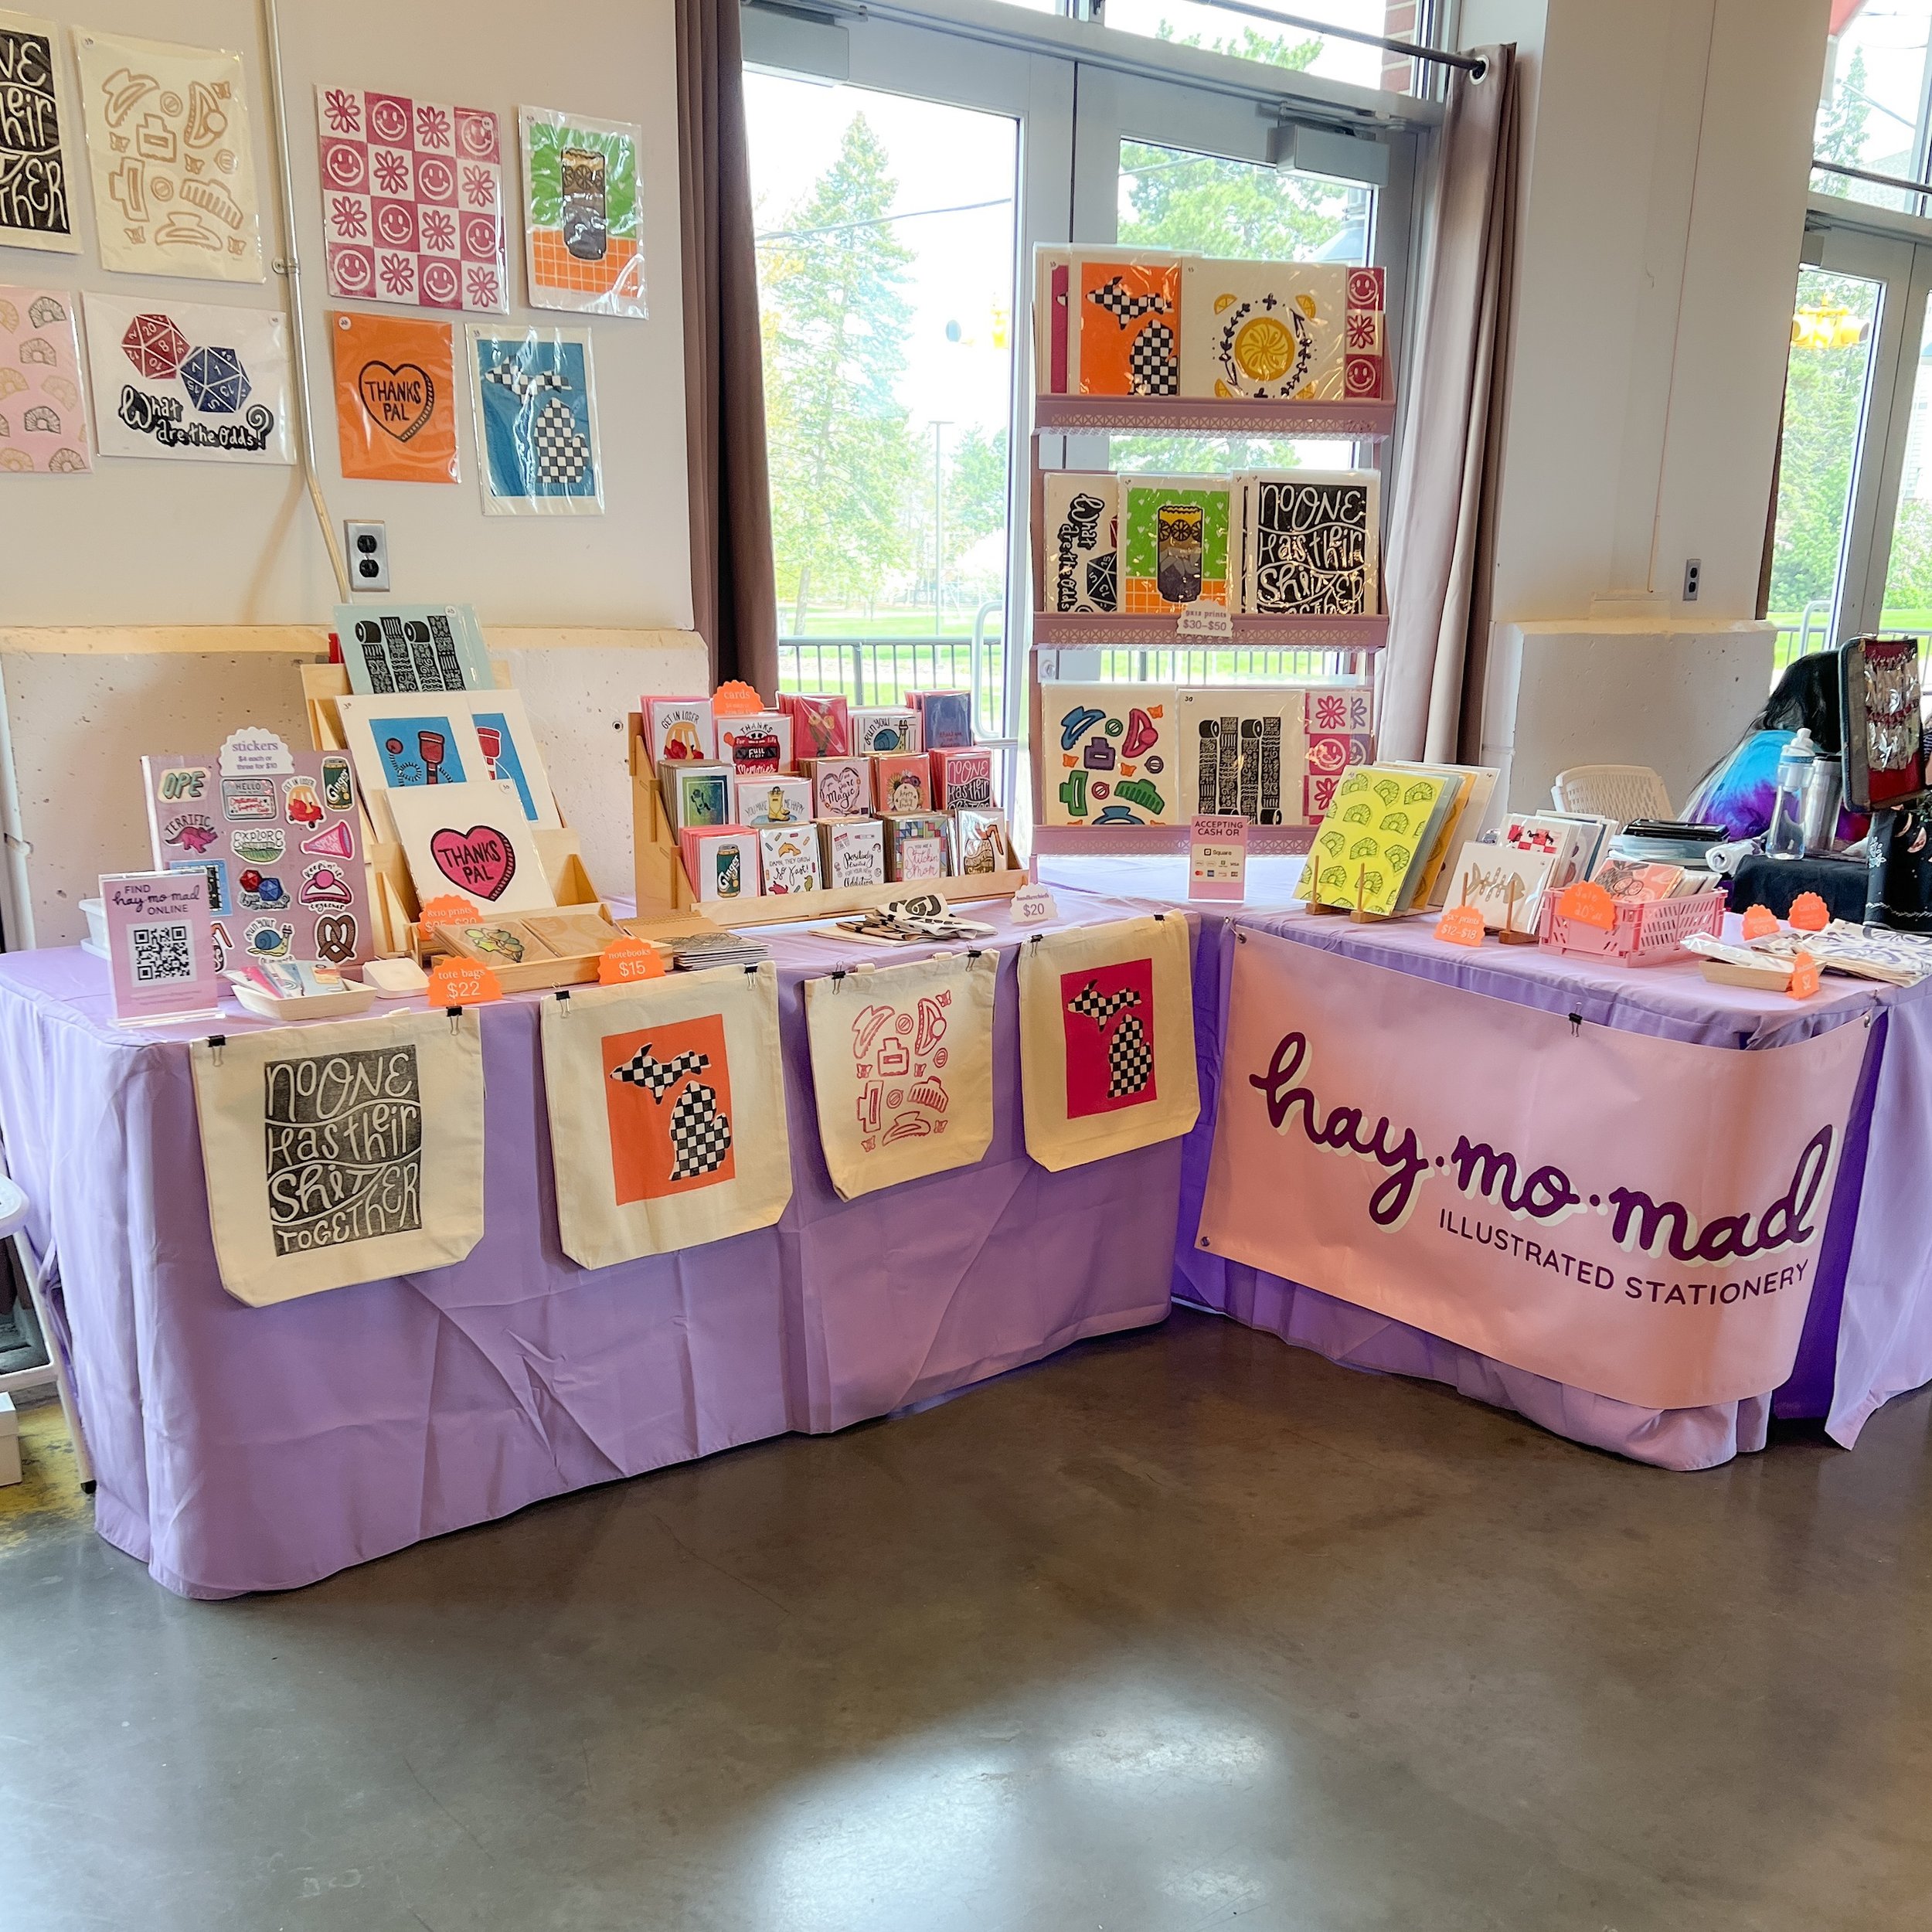 Thanks to everyone who came out to @flinthandmade spring market this weekend! I had a lovely time chatting with artists and shoppers. 
.
#springmarket #springfair #artistbooth #boothshot #artdisplay #craftmarket #michigancraft #handmademichigan